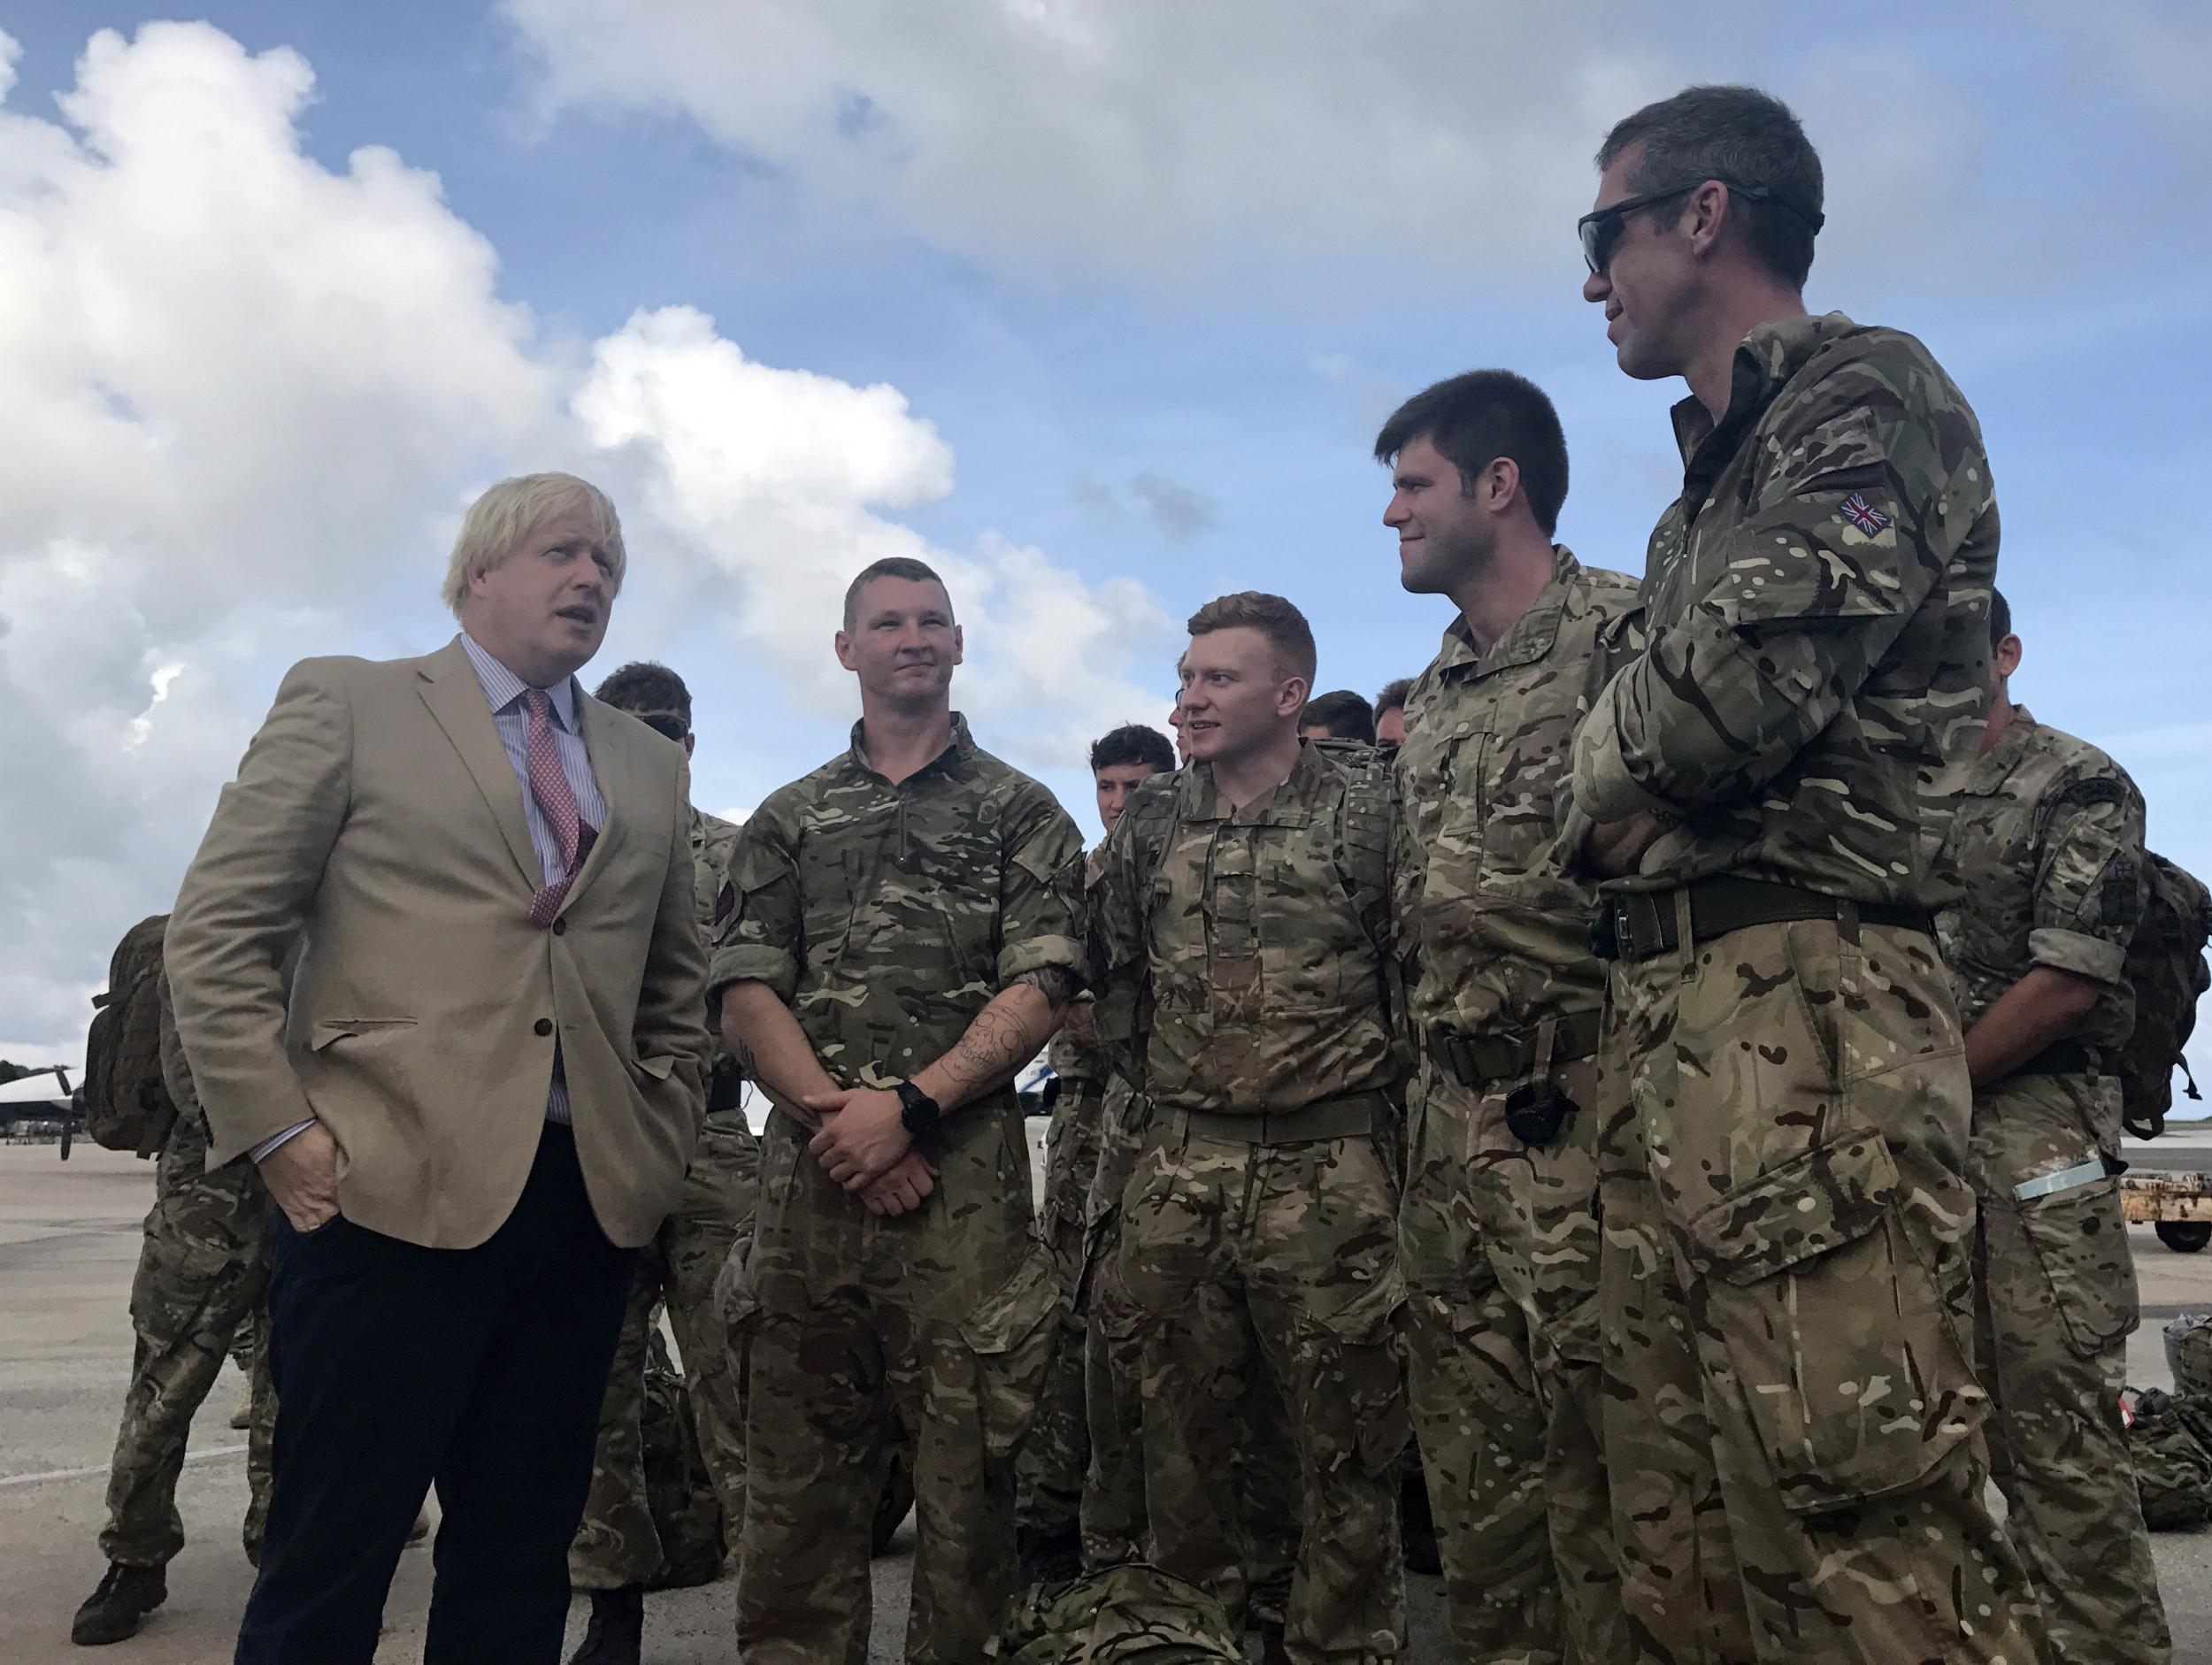 Foreign Secretary Boris Johnson talks to Royal Marines from 40 Commando in Barbados, where he stopped on his way to visit British territories ravaged by Hurricane Irma